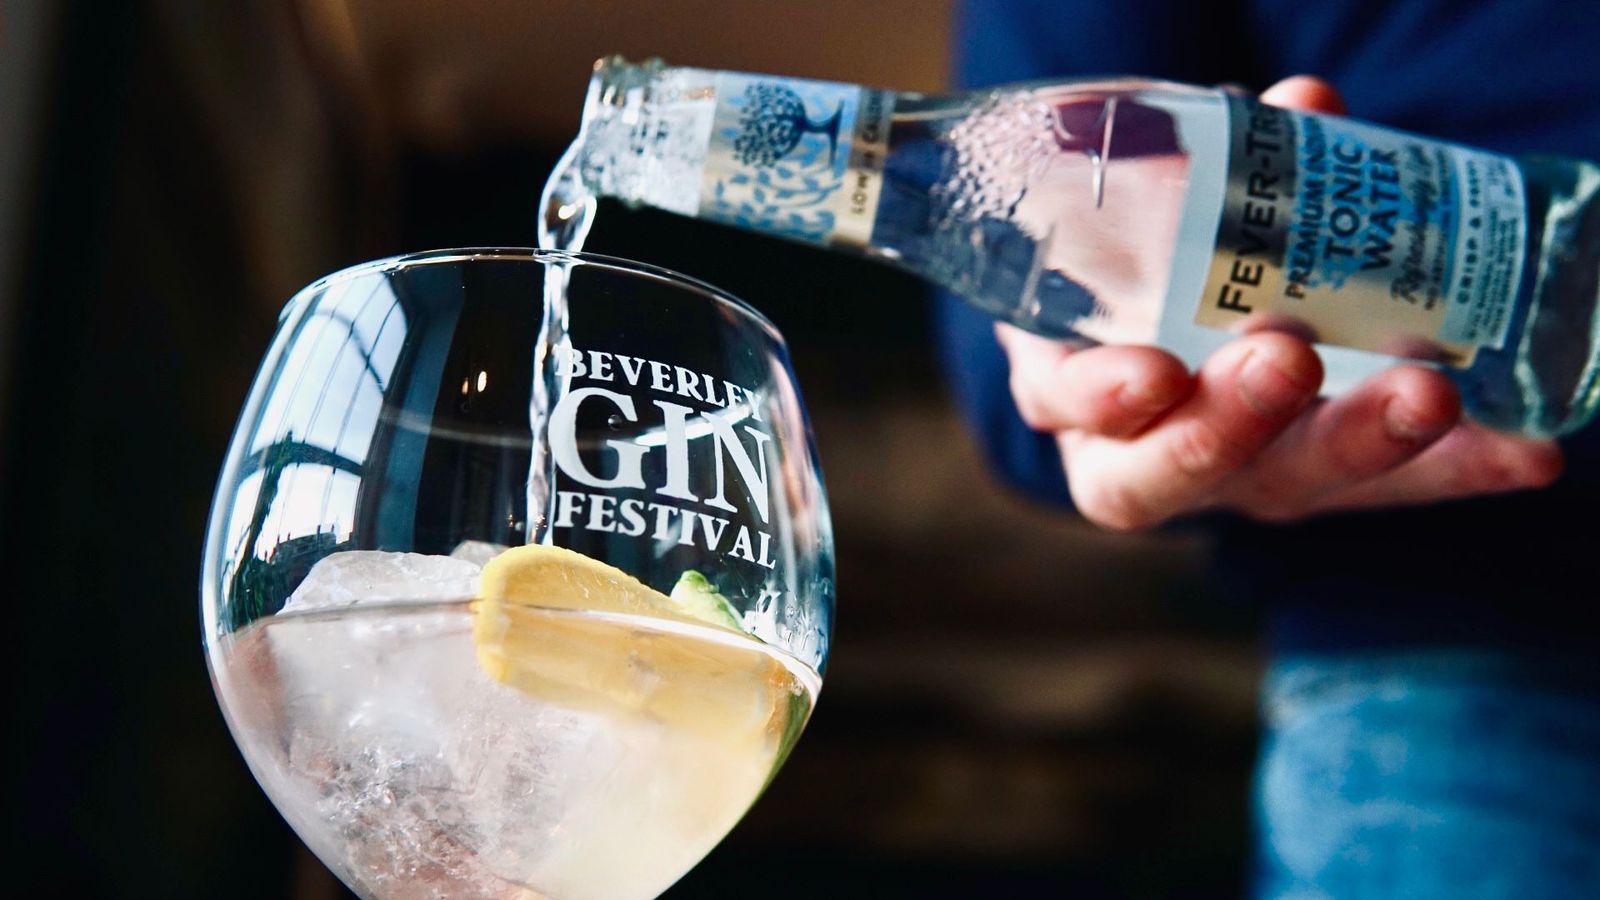 Beverley Gin festival all set for this weekend at Minster